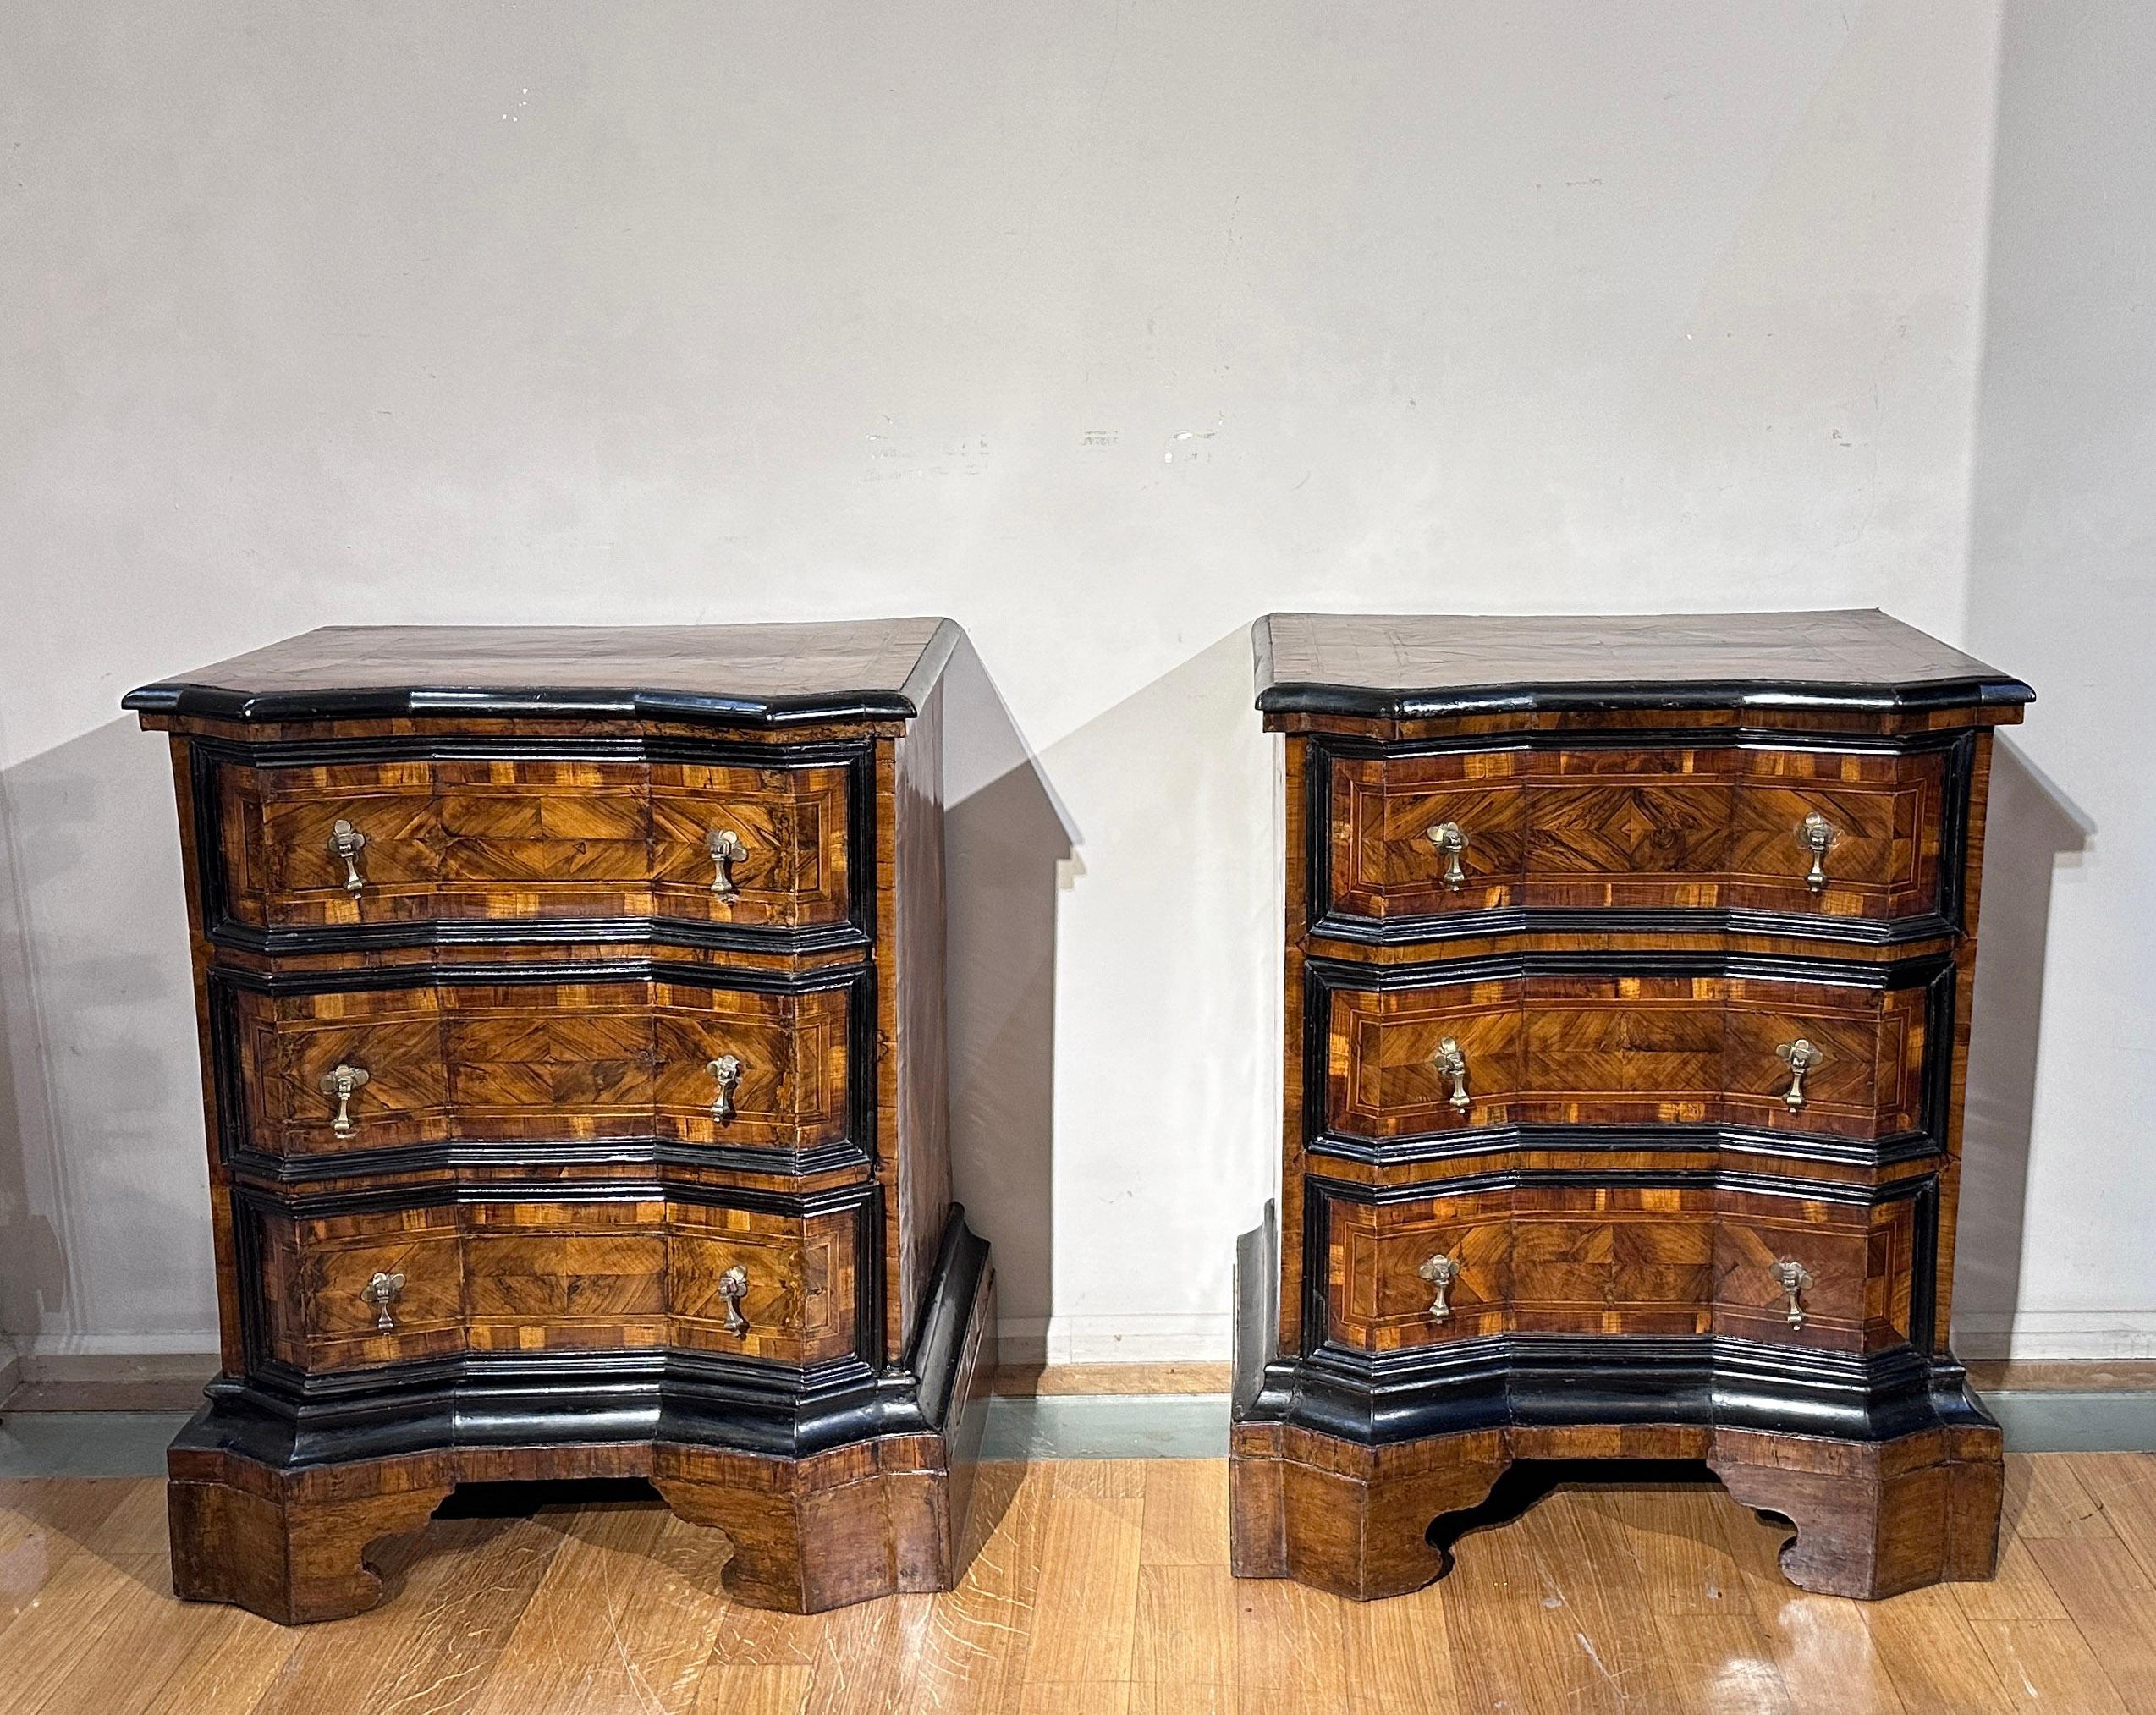 Elegant pair of walnut veneered chests of drawers with geometric motifs and ebonized wood finishes. The wavy front, the owl's beak shaped top and the shelf base give a unique elegance to these pieces of furniture. One of the two drawers has drawers,